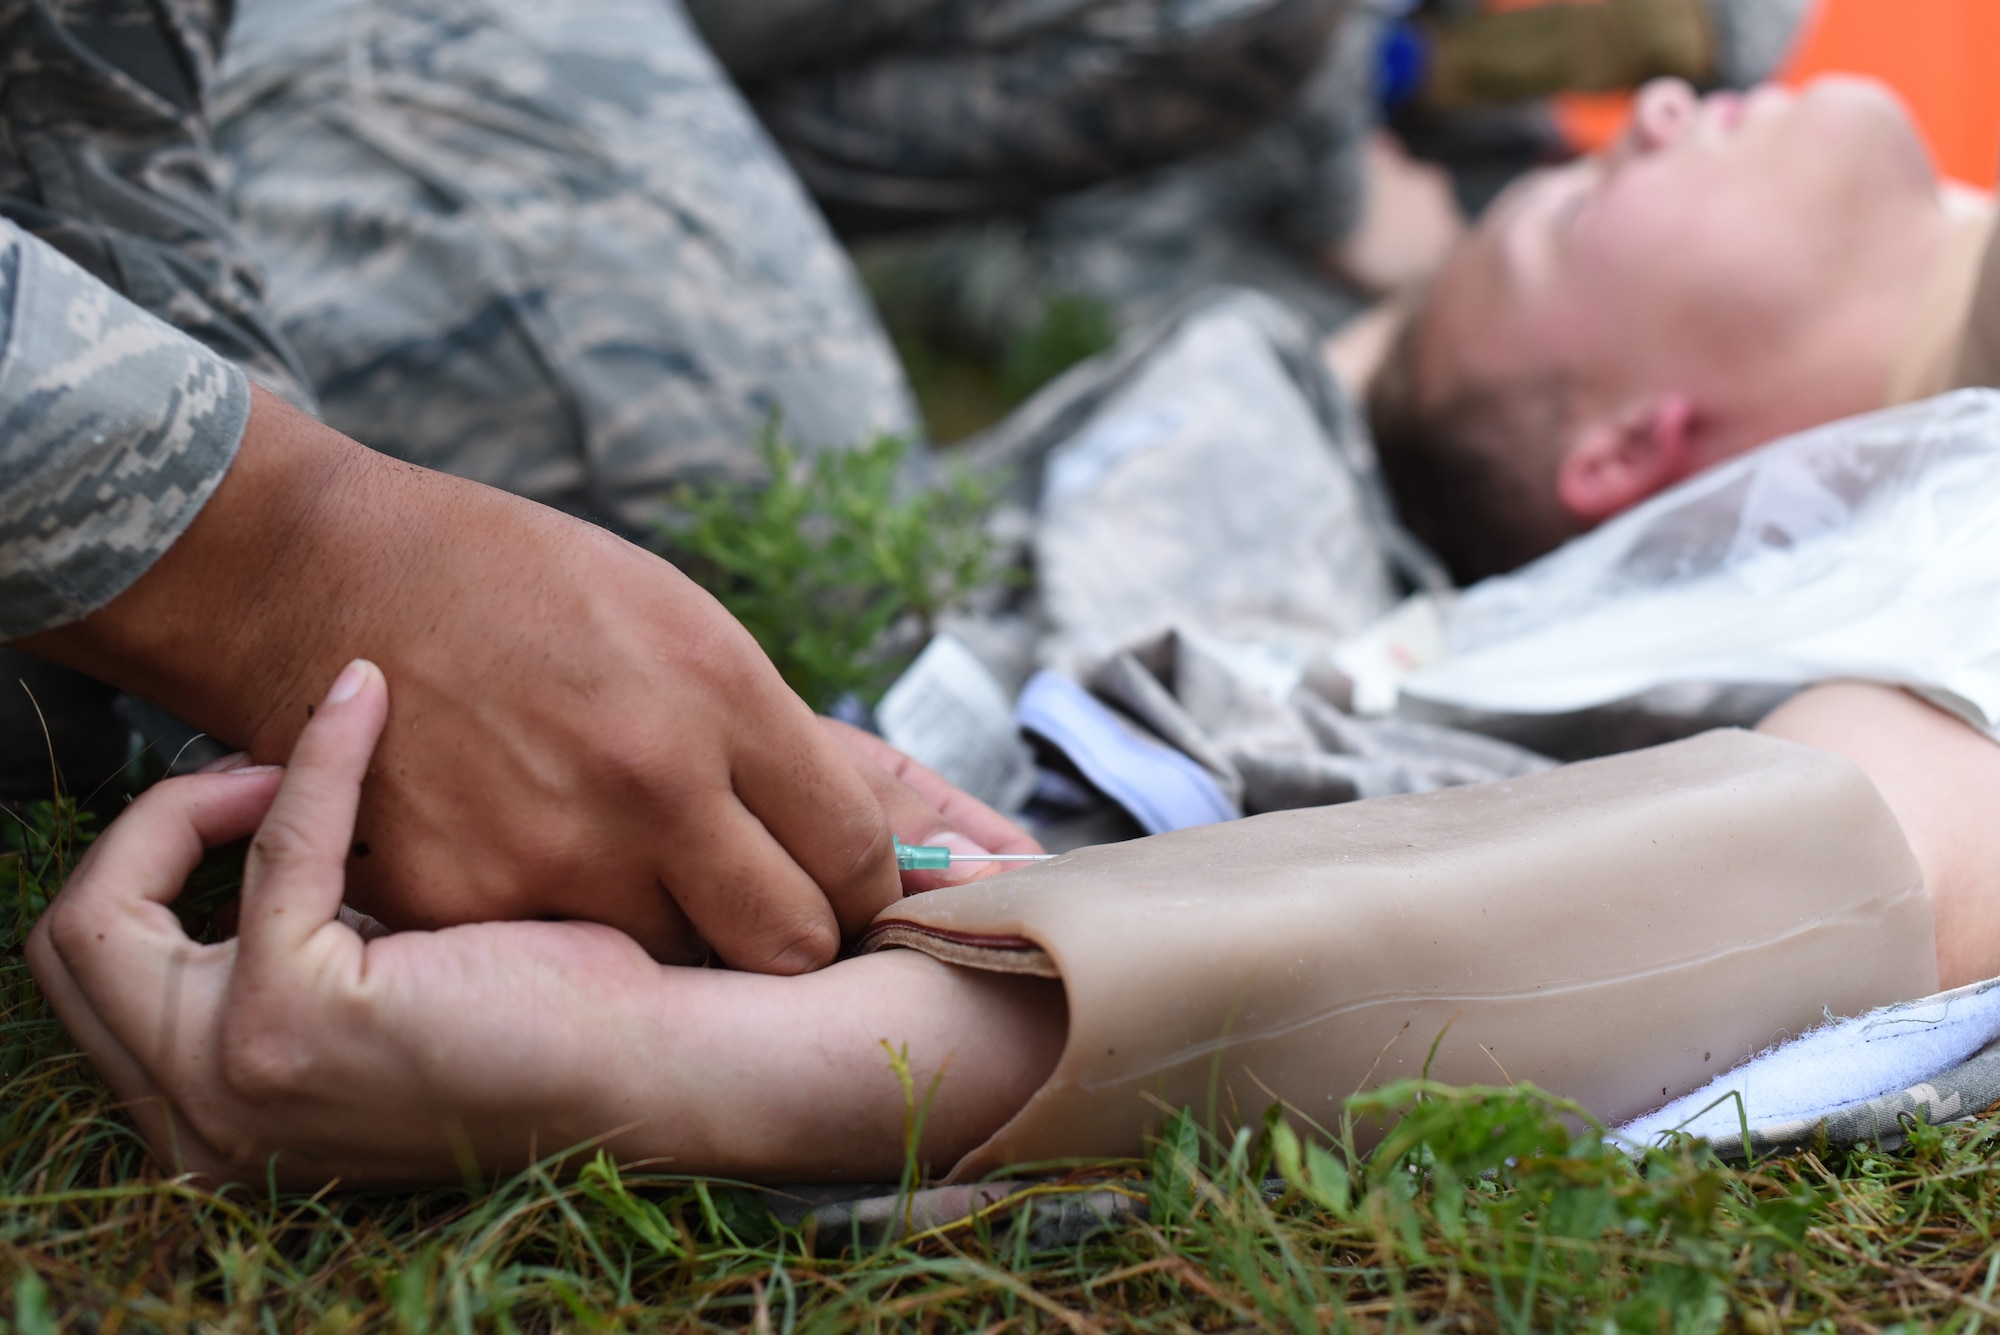 Airman 1st Class Anthony Thomason 22nd Healthcare Operation Squadron medical technician, uses Tactical Combat Casualty Care techniques during an Emergency Medical Technician Rodeo Aug. 22, 2019, at McConnell Air Force Base, Kan. TCCC is a standardized course created to give Airmen the tools that they need to survive using lifesaving medical training while in a combat environment. TCCC will replace the Self Aid and Buddy Care Program and will be focus on controlling massive bleeding, care under fire and airway management. (U.S. Air Force photo by Airman 1st Class Alexi Myrick)